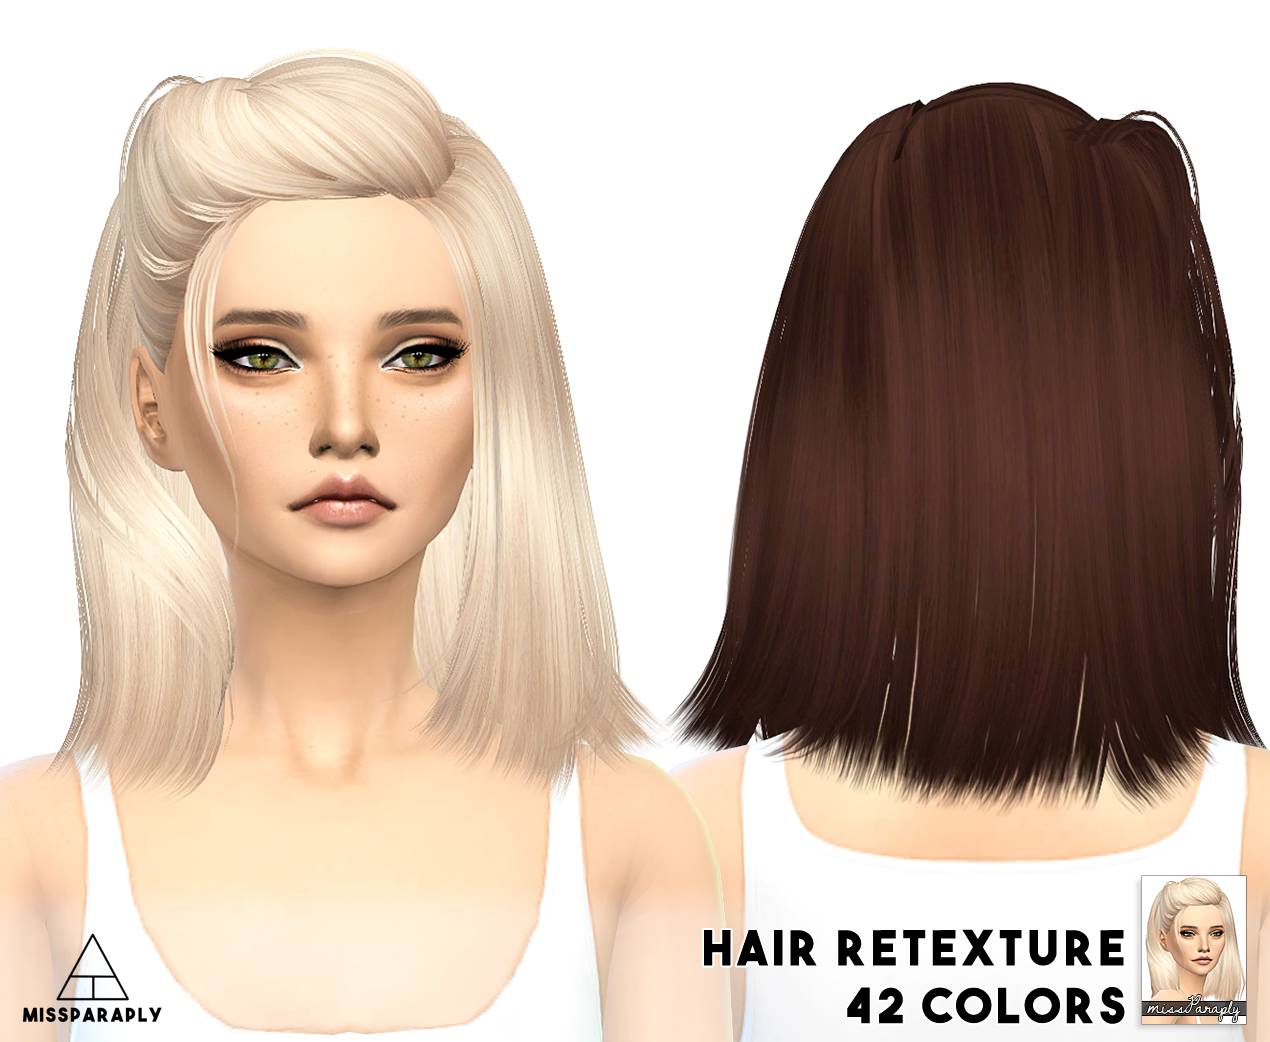 My Sims 4 Blog Skysims Hair Retexture For Females By Missparaply